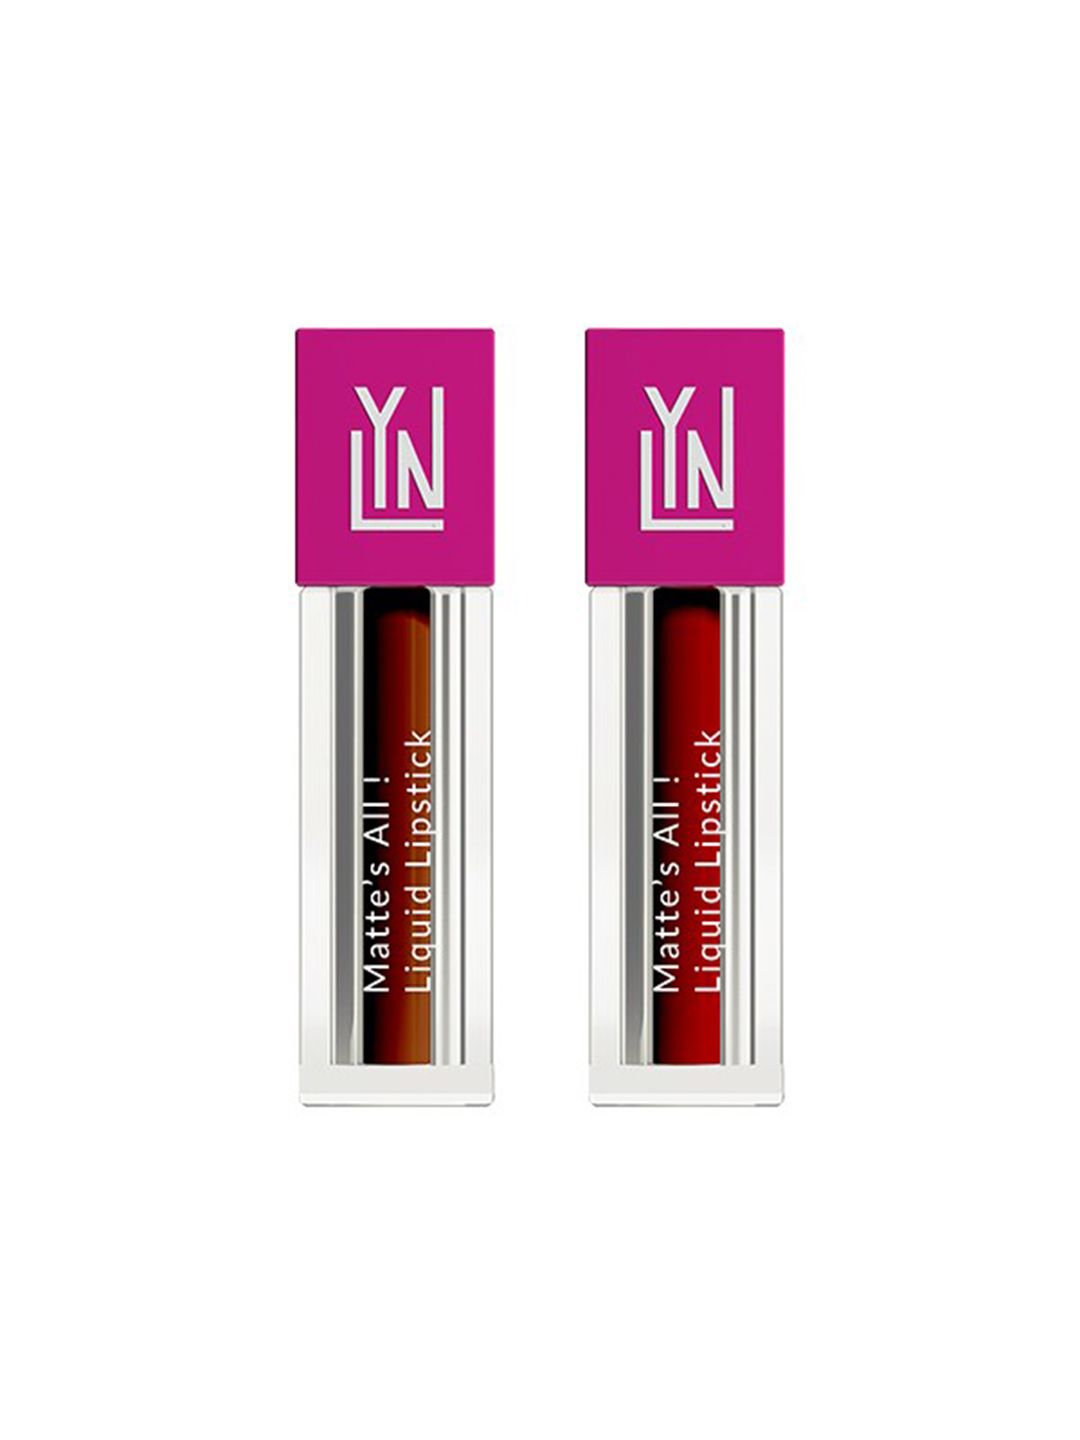 LYN LIVE YOUR NOW Set Of 2 Matte Liquid Lipstick Brownie Point & Born Red-dy - 2ml Price in India